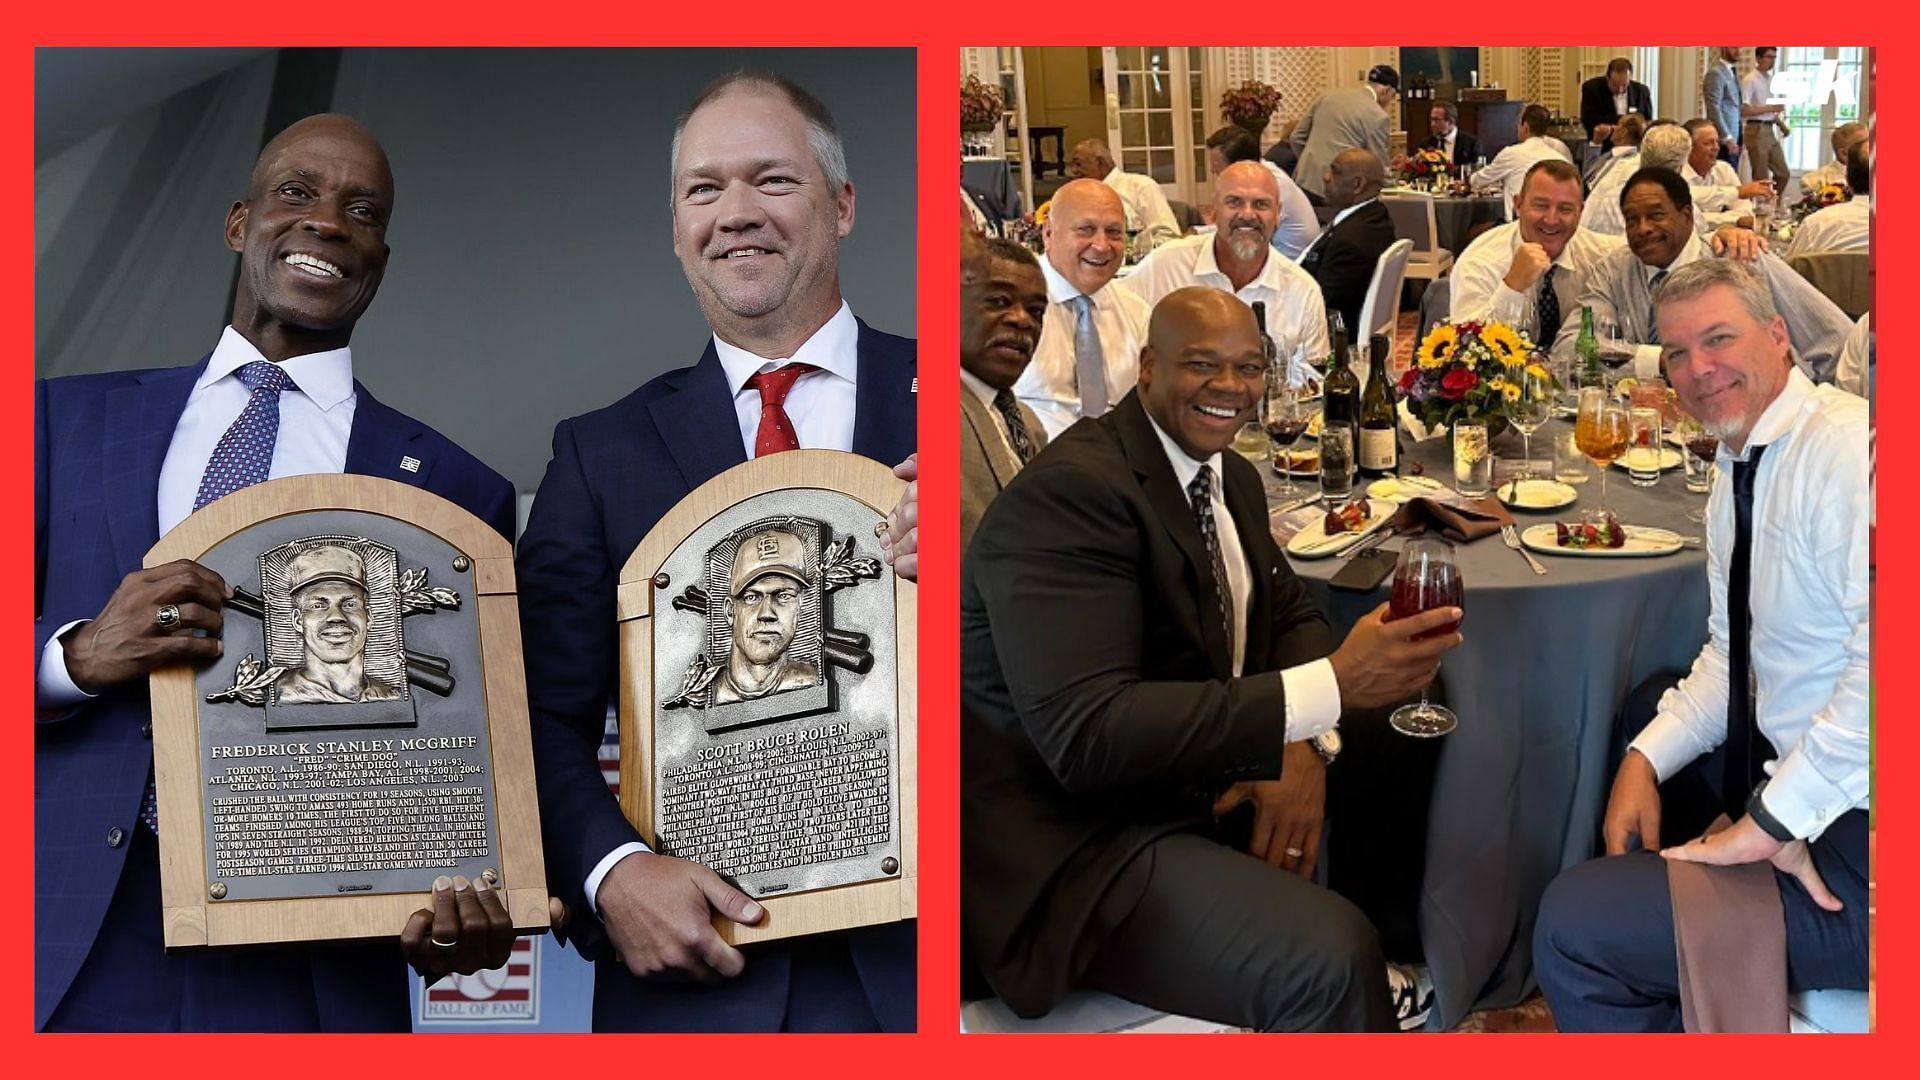 In Photos: 4507 Homeruns in one picture as MLB Hall of Famers get together at dinner party 